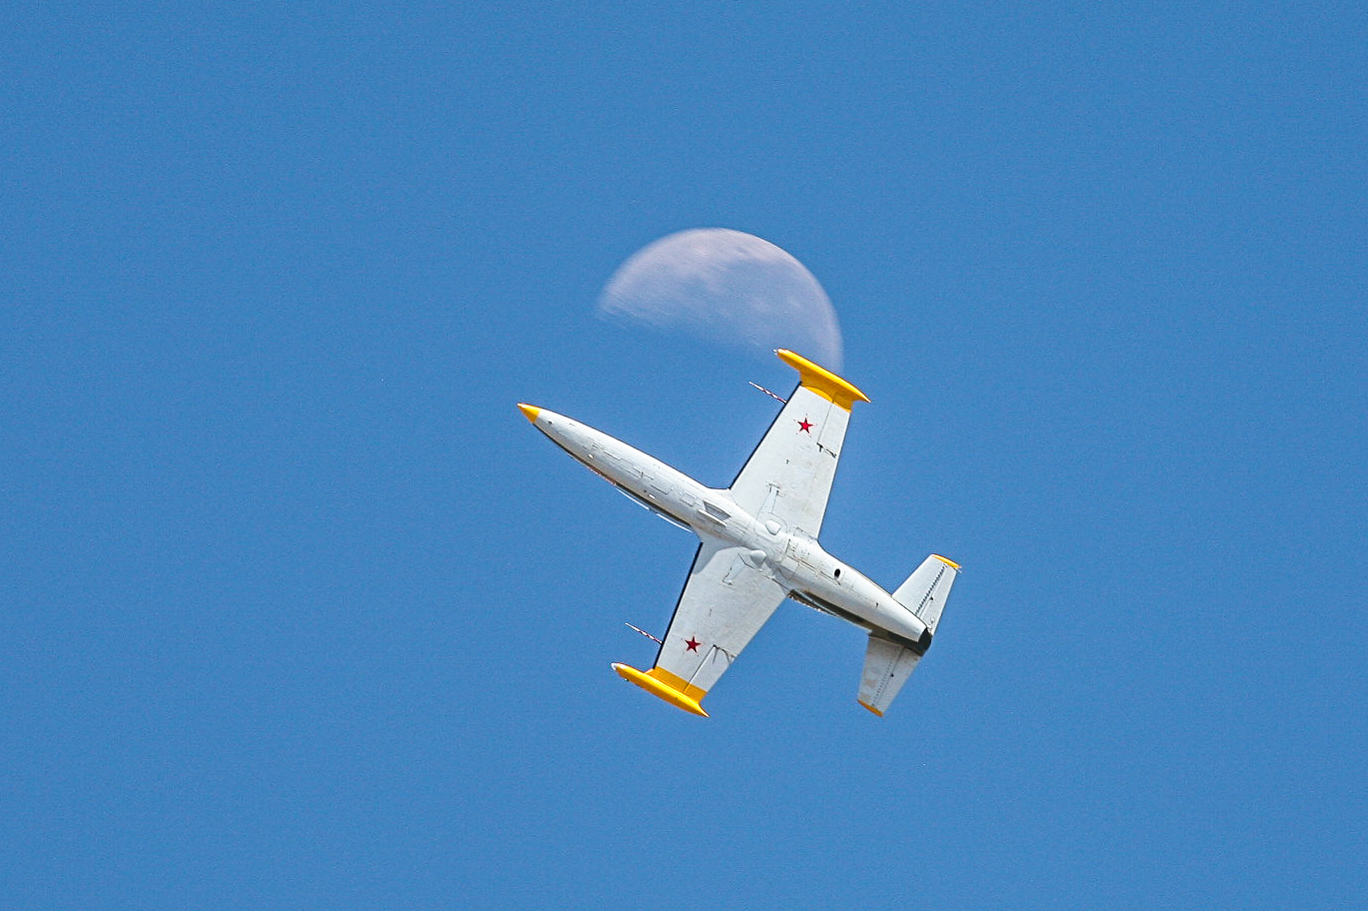 A stunning shot of the L-39 passing the moon. (photo by Phil Buckley)